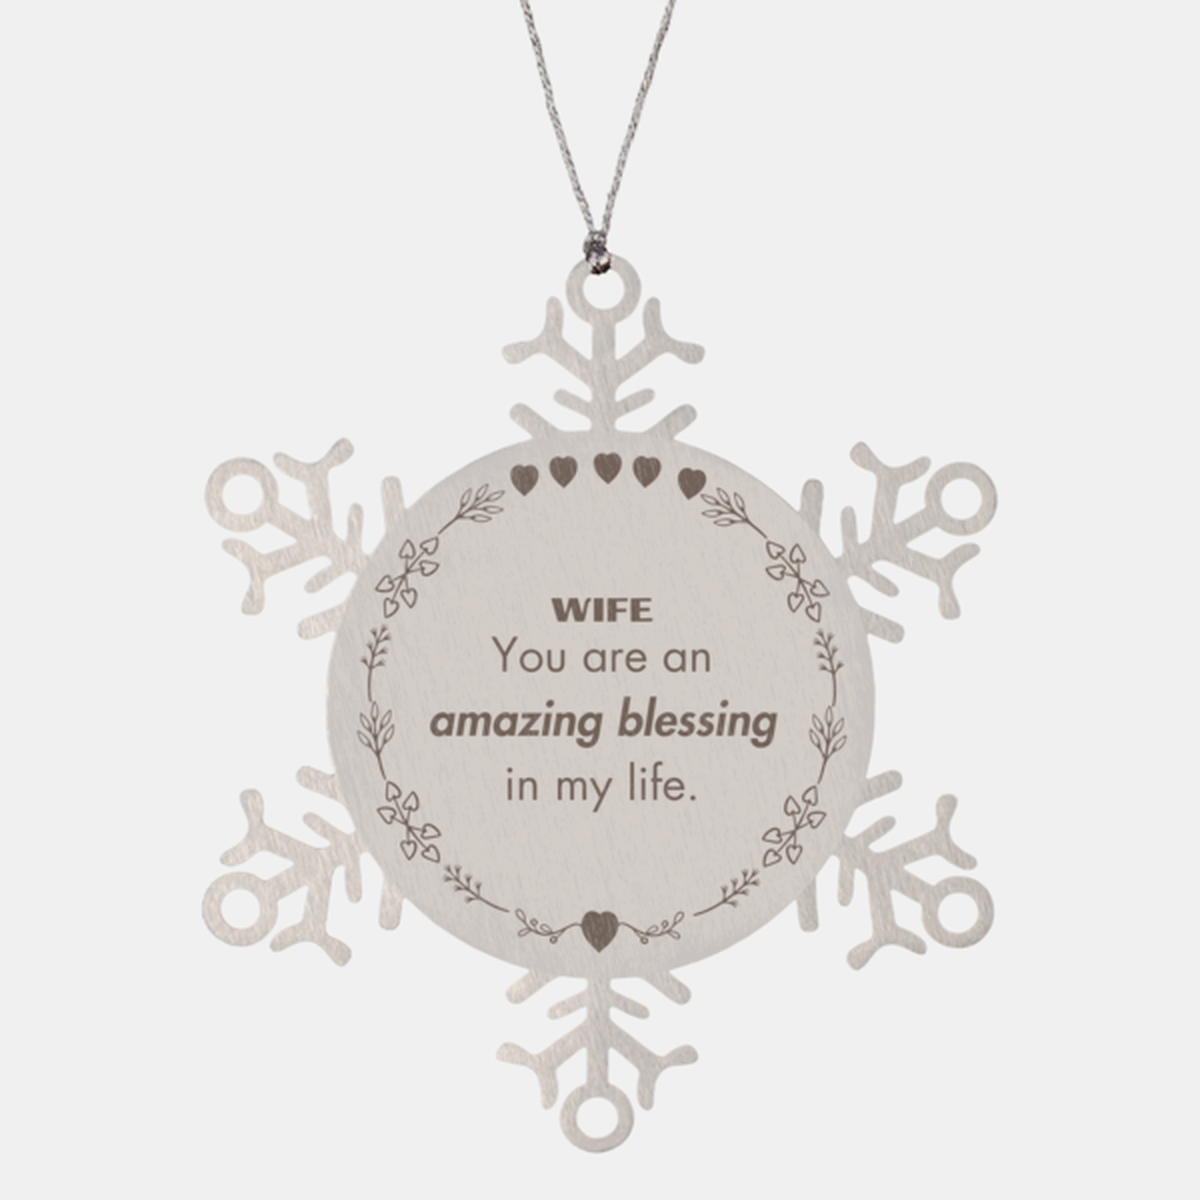 Wife Snowflake Ornament, You are an amazing blessing in my life, Thank You Gifts For Wife, Inspirational Birthday Christmas Unique Gifts For Wife